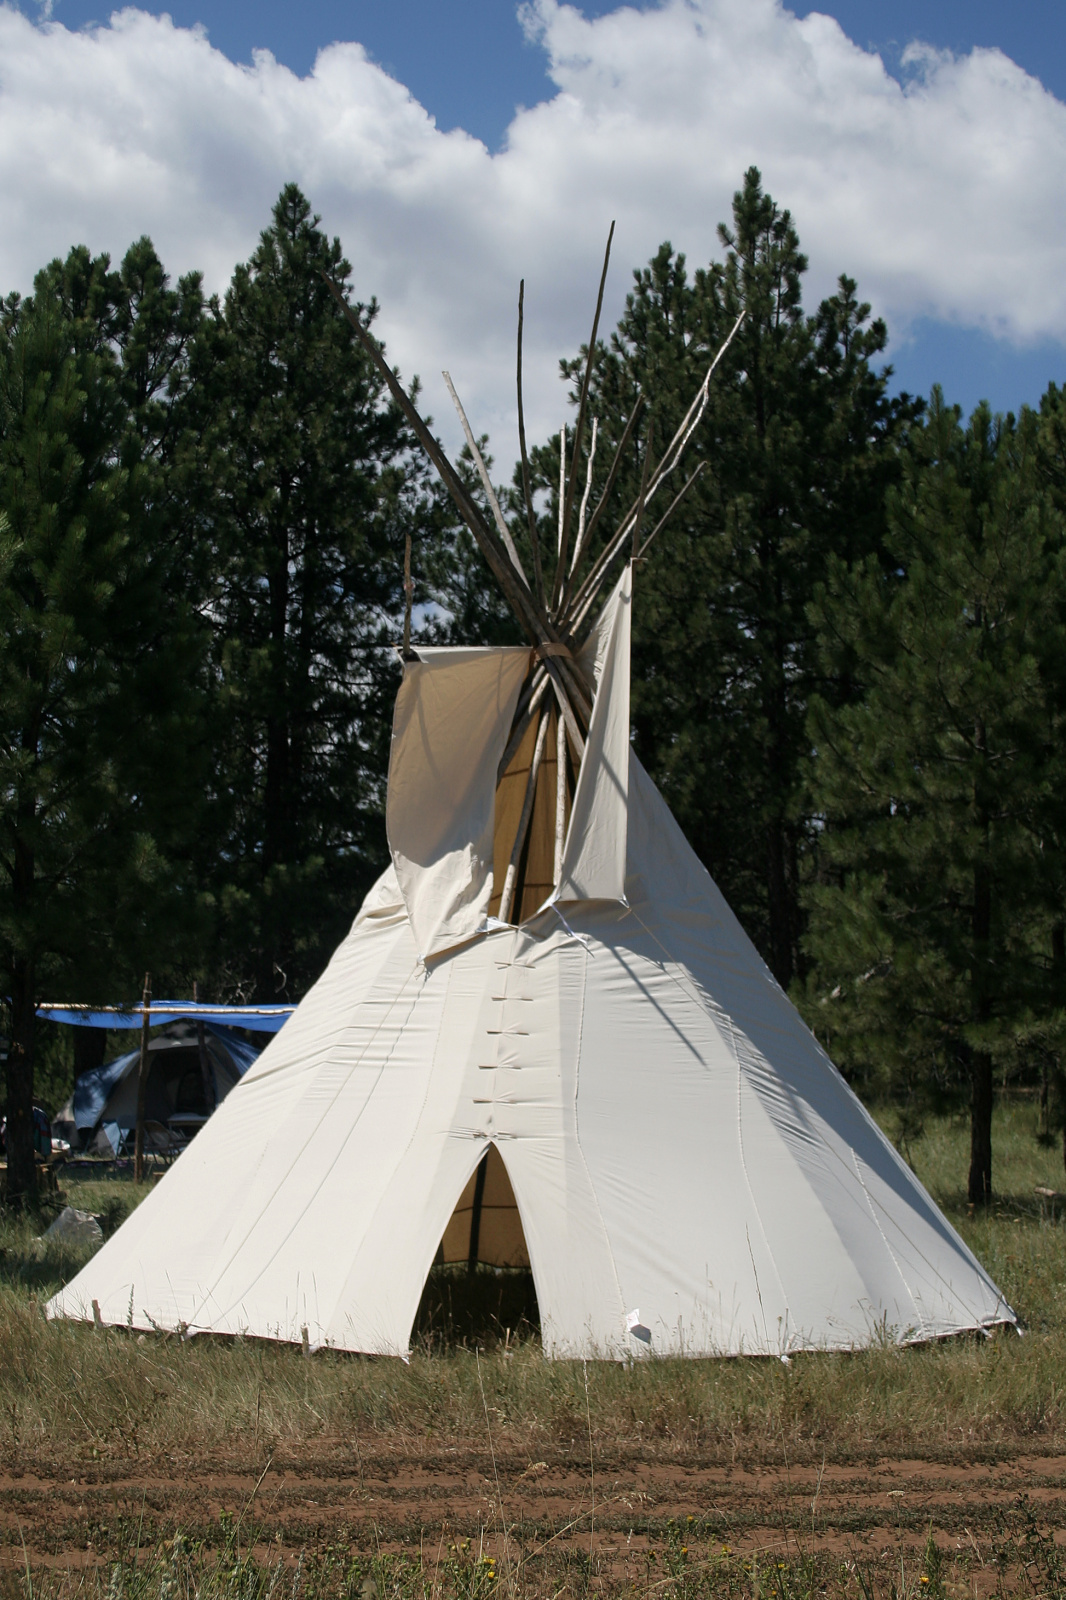 Eugene's Tipi (Travels » US Trip 1: Cheyenne Country » Teepees)